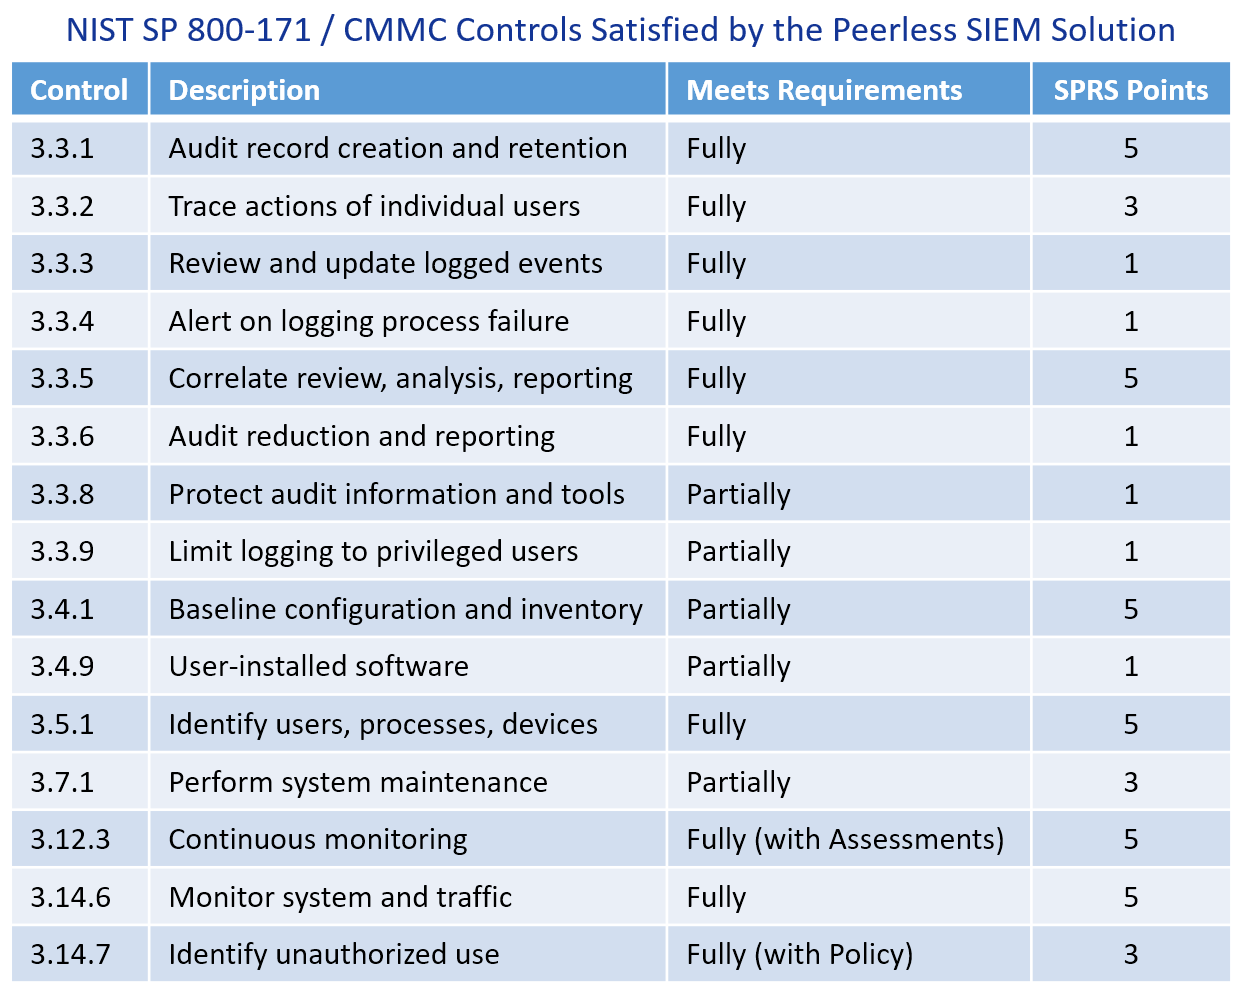 List of controls satisfied by the Peerless SIEM solution.